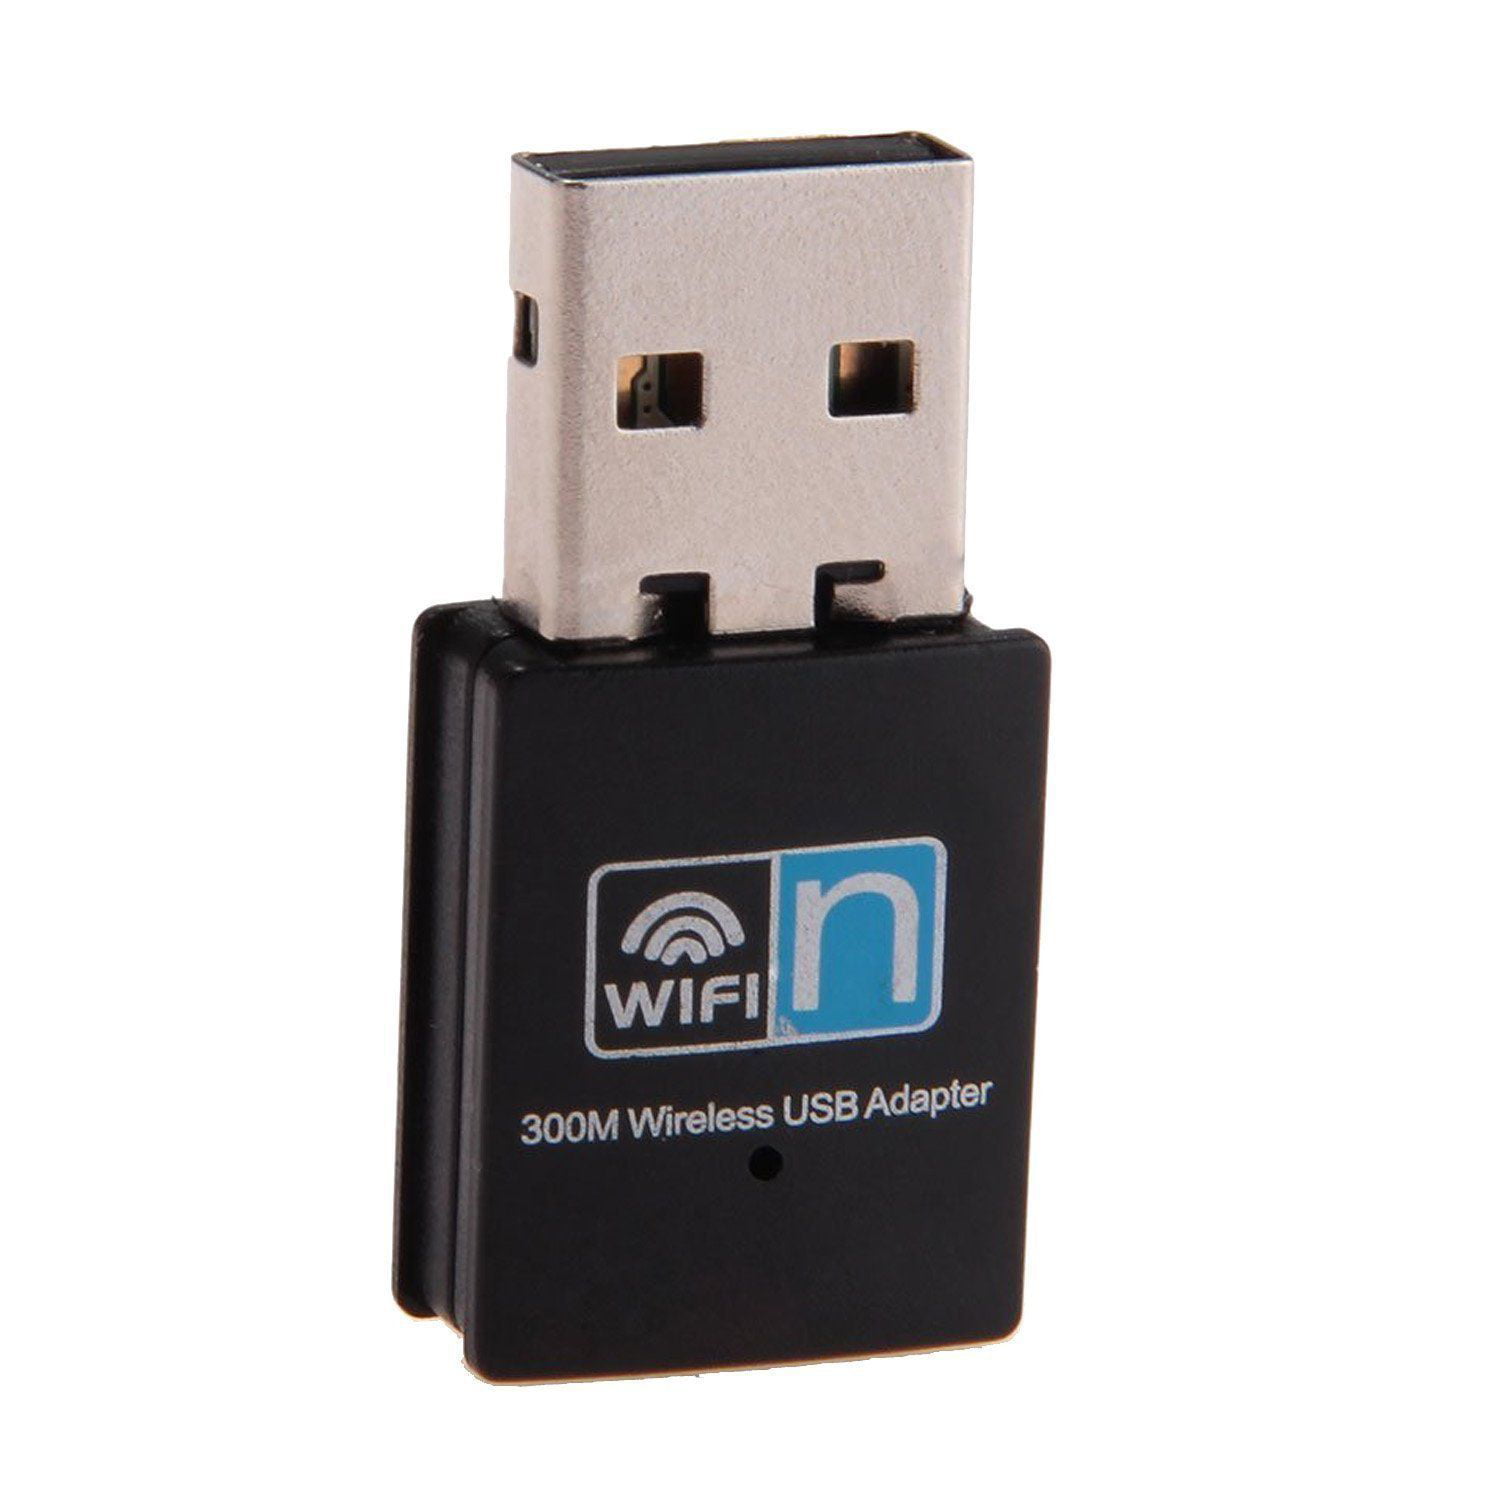 Mini USB 300MBPS WIFI Wireless Adapters PC Laptop Dongle For PC Windows Vistas 